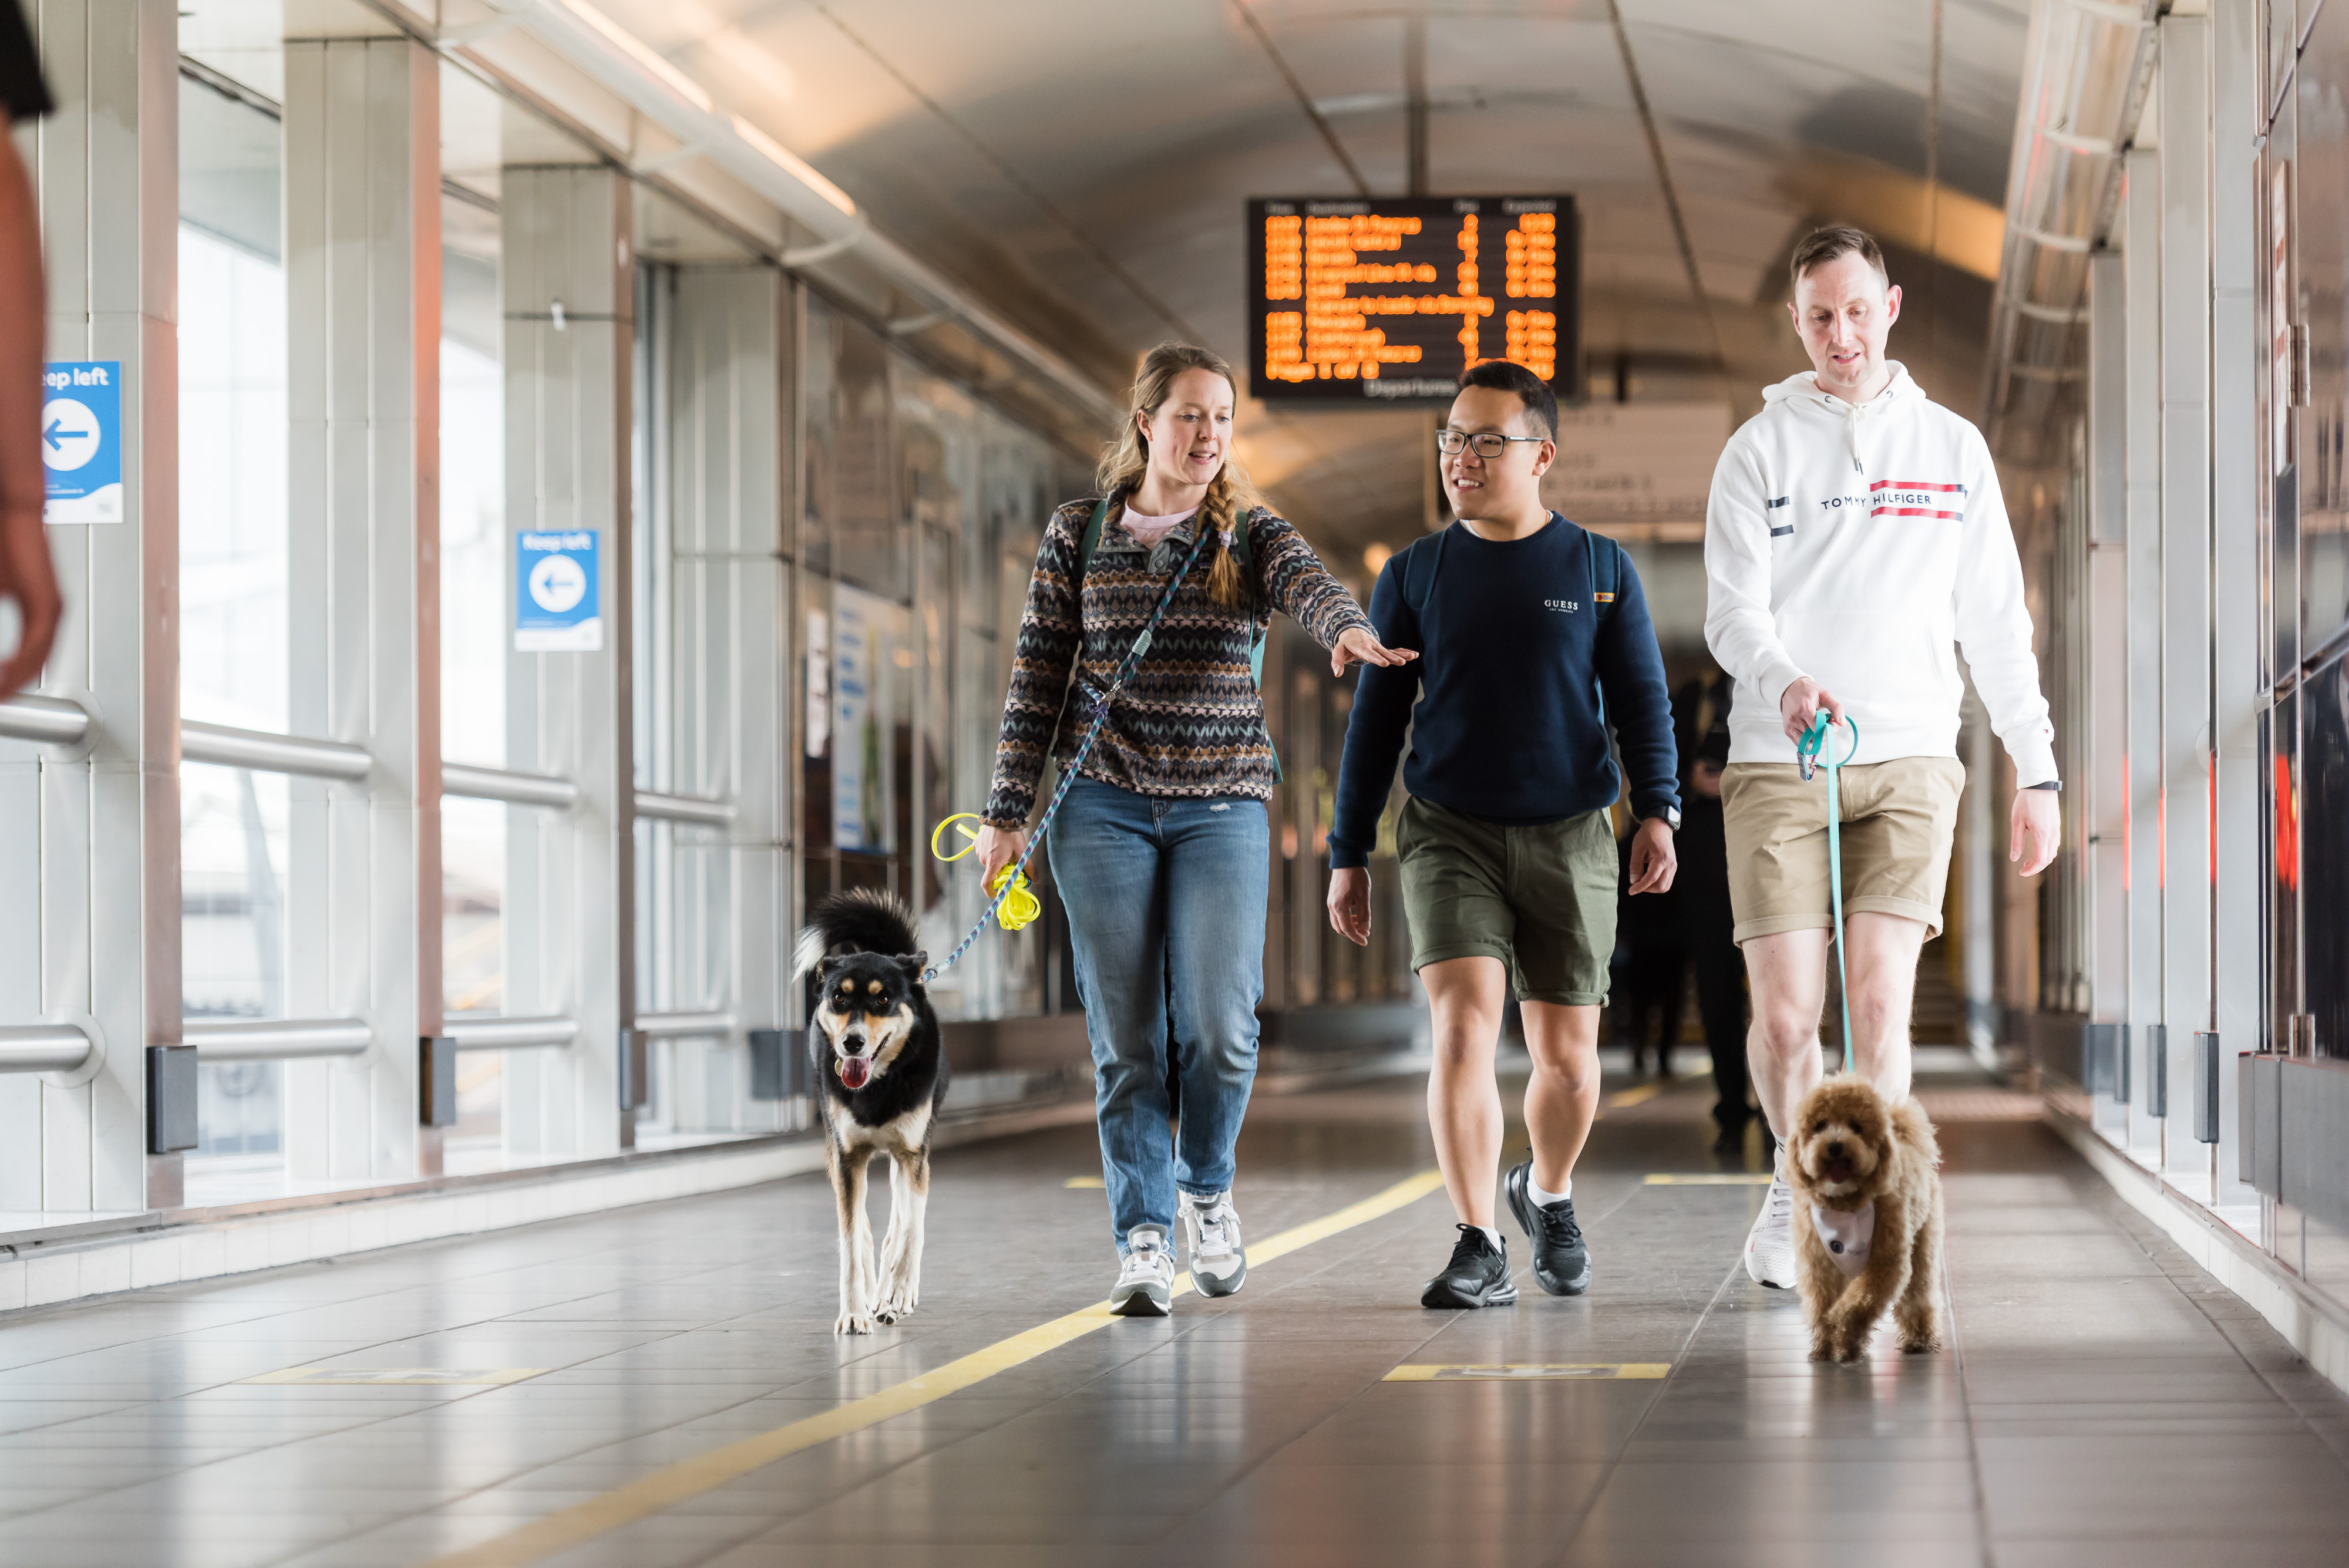 Dogs and their owners walking through a train station